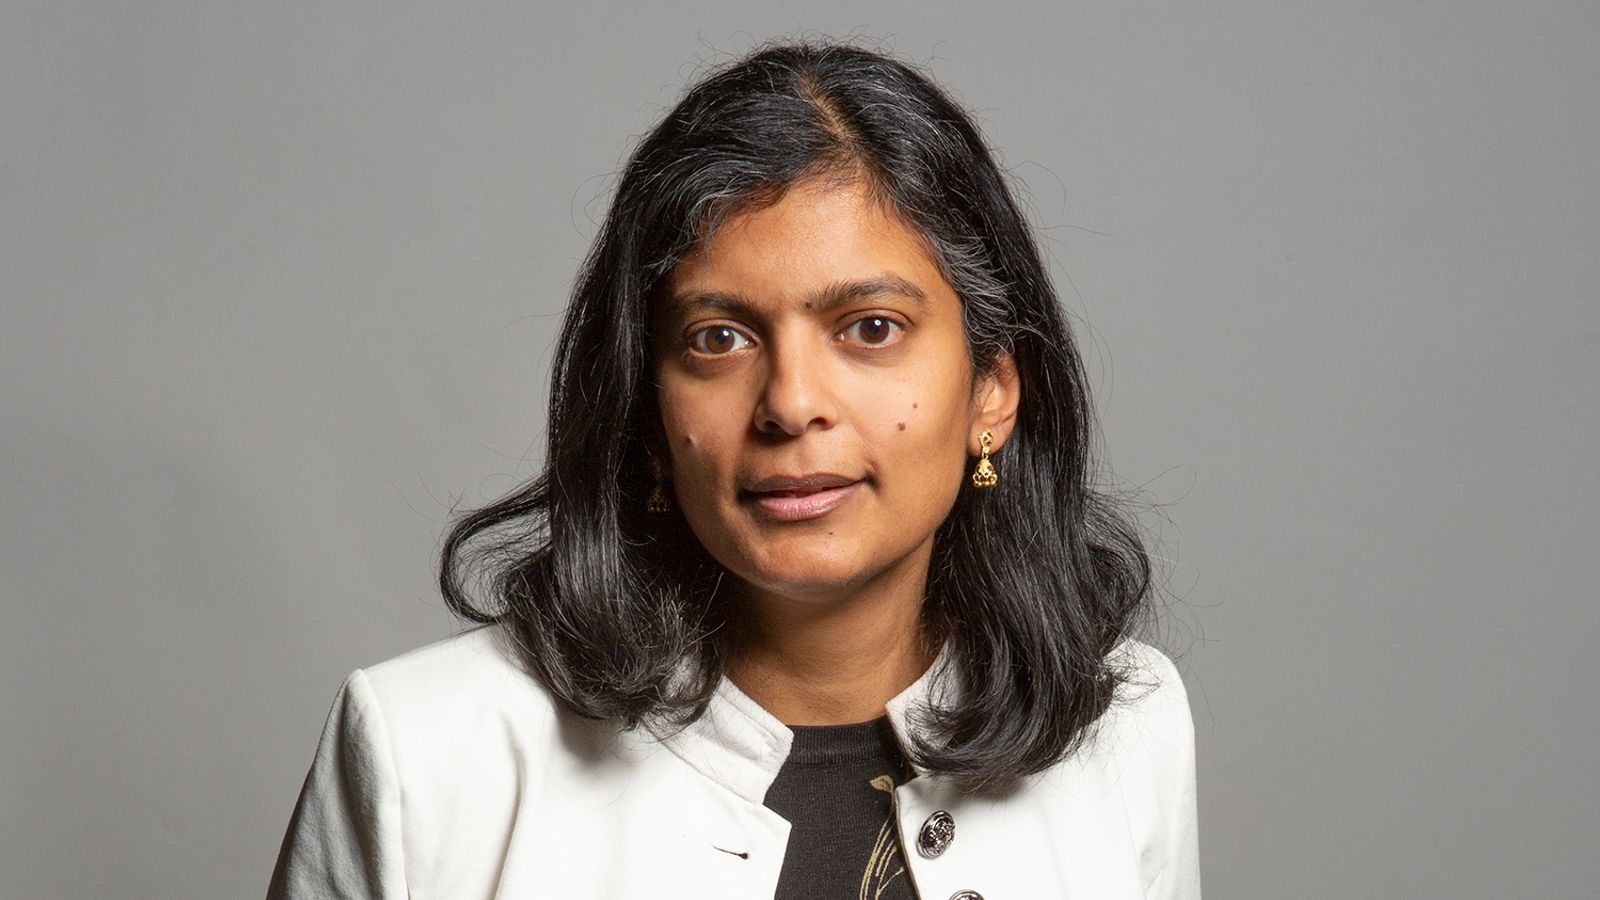 Labour MP Rupa Huq suspended from party for calling Chancellor Kwasi Kwarteng 'superficially' black